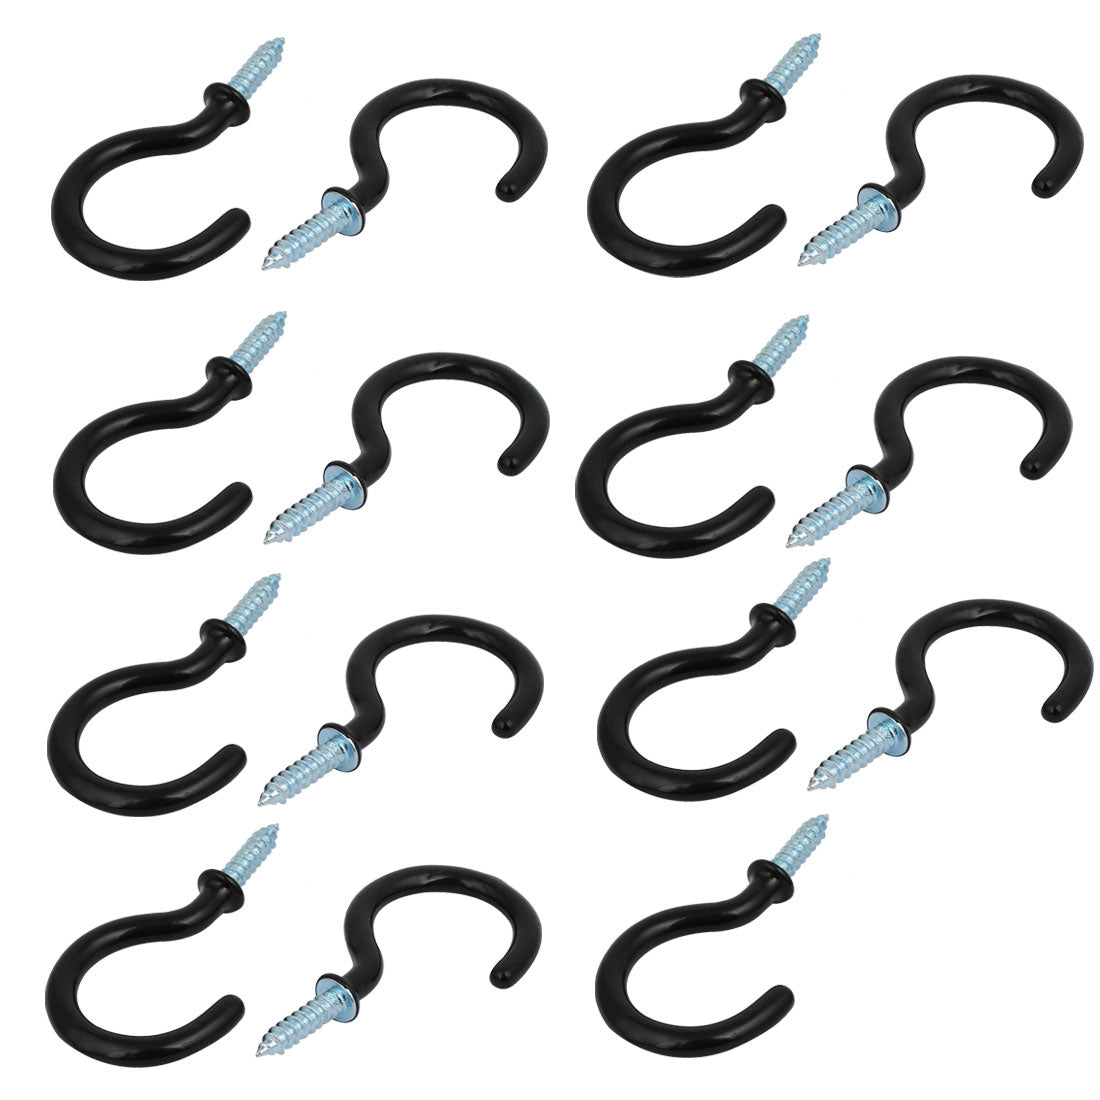 uxcell Uxcell 1-1/2 Inch Plastic Coated Screw-in Open Cup Ceiling Hooks Hangers Black 15pcs